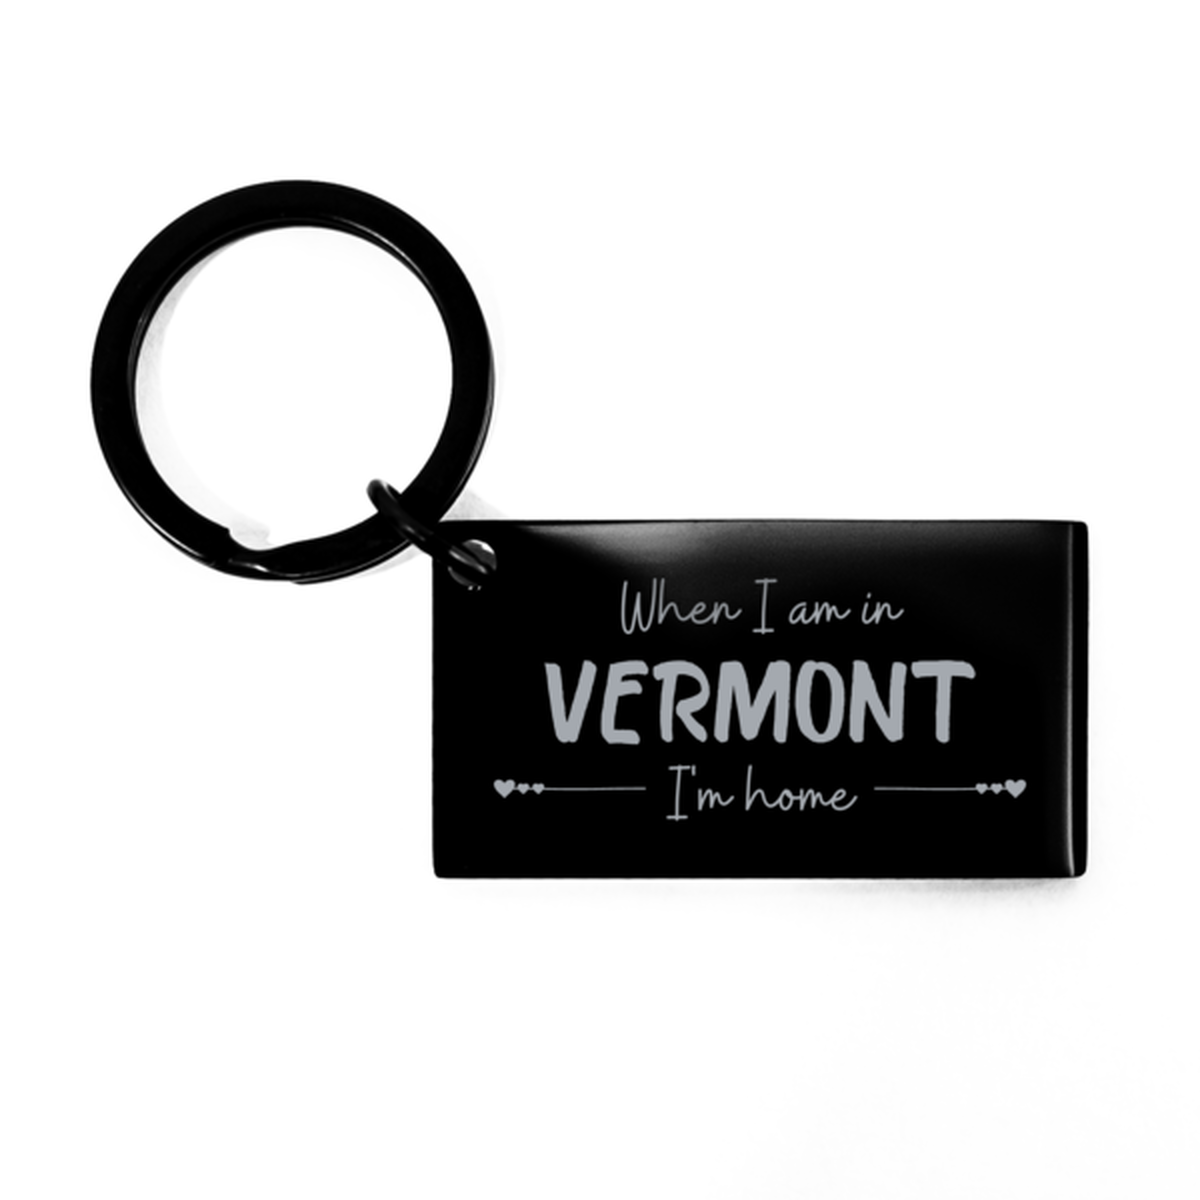 When I am in Vermont I'm home Keychain, Cheap Gifts For Vermont, State Vermont Birthday Gifts for Friends Coworker